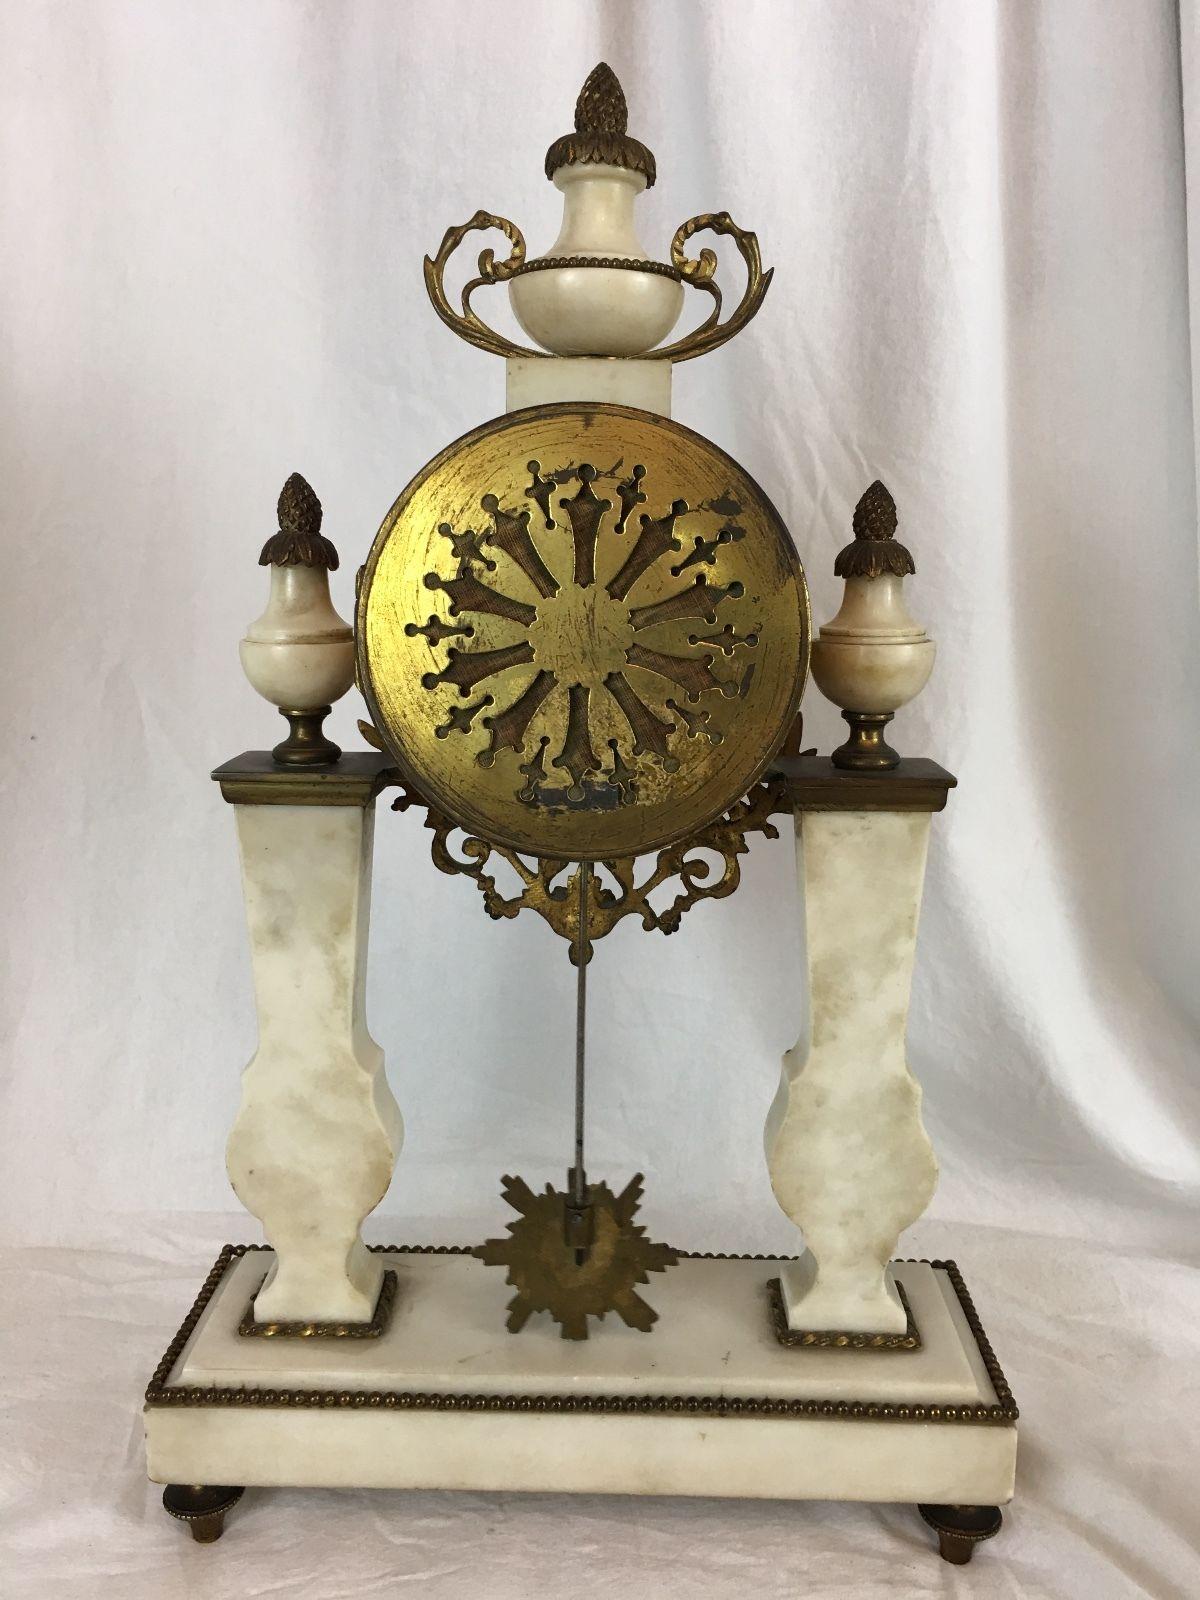 Beautiful French portico clock set 

White marble with gilt brass ormolu. Two columns supporting clock, sunburst face pendulum

Roman numerals for hour and Arabic numbers for minutes 

Bosch Honig & Co. Utrecht, possibly retailer 

8 day